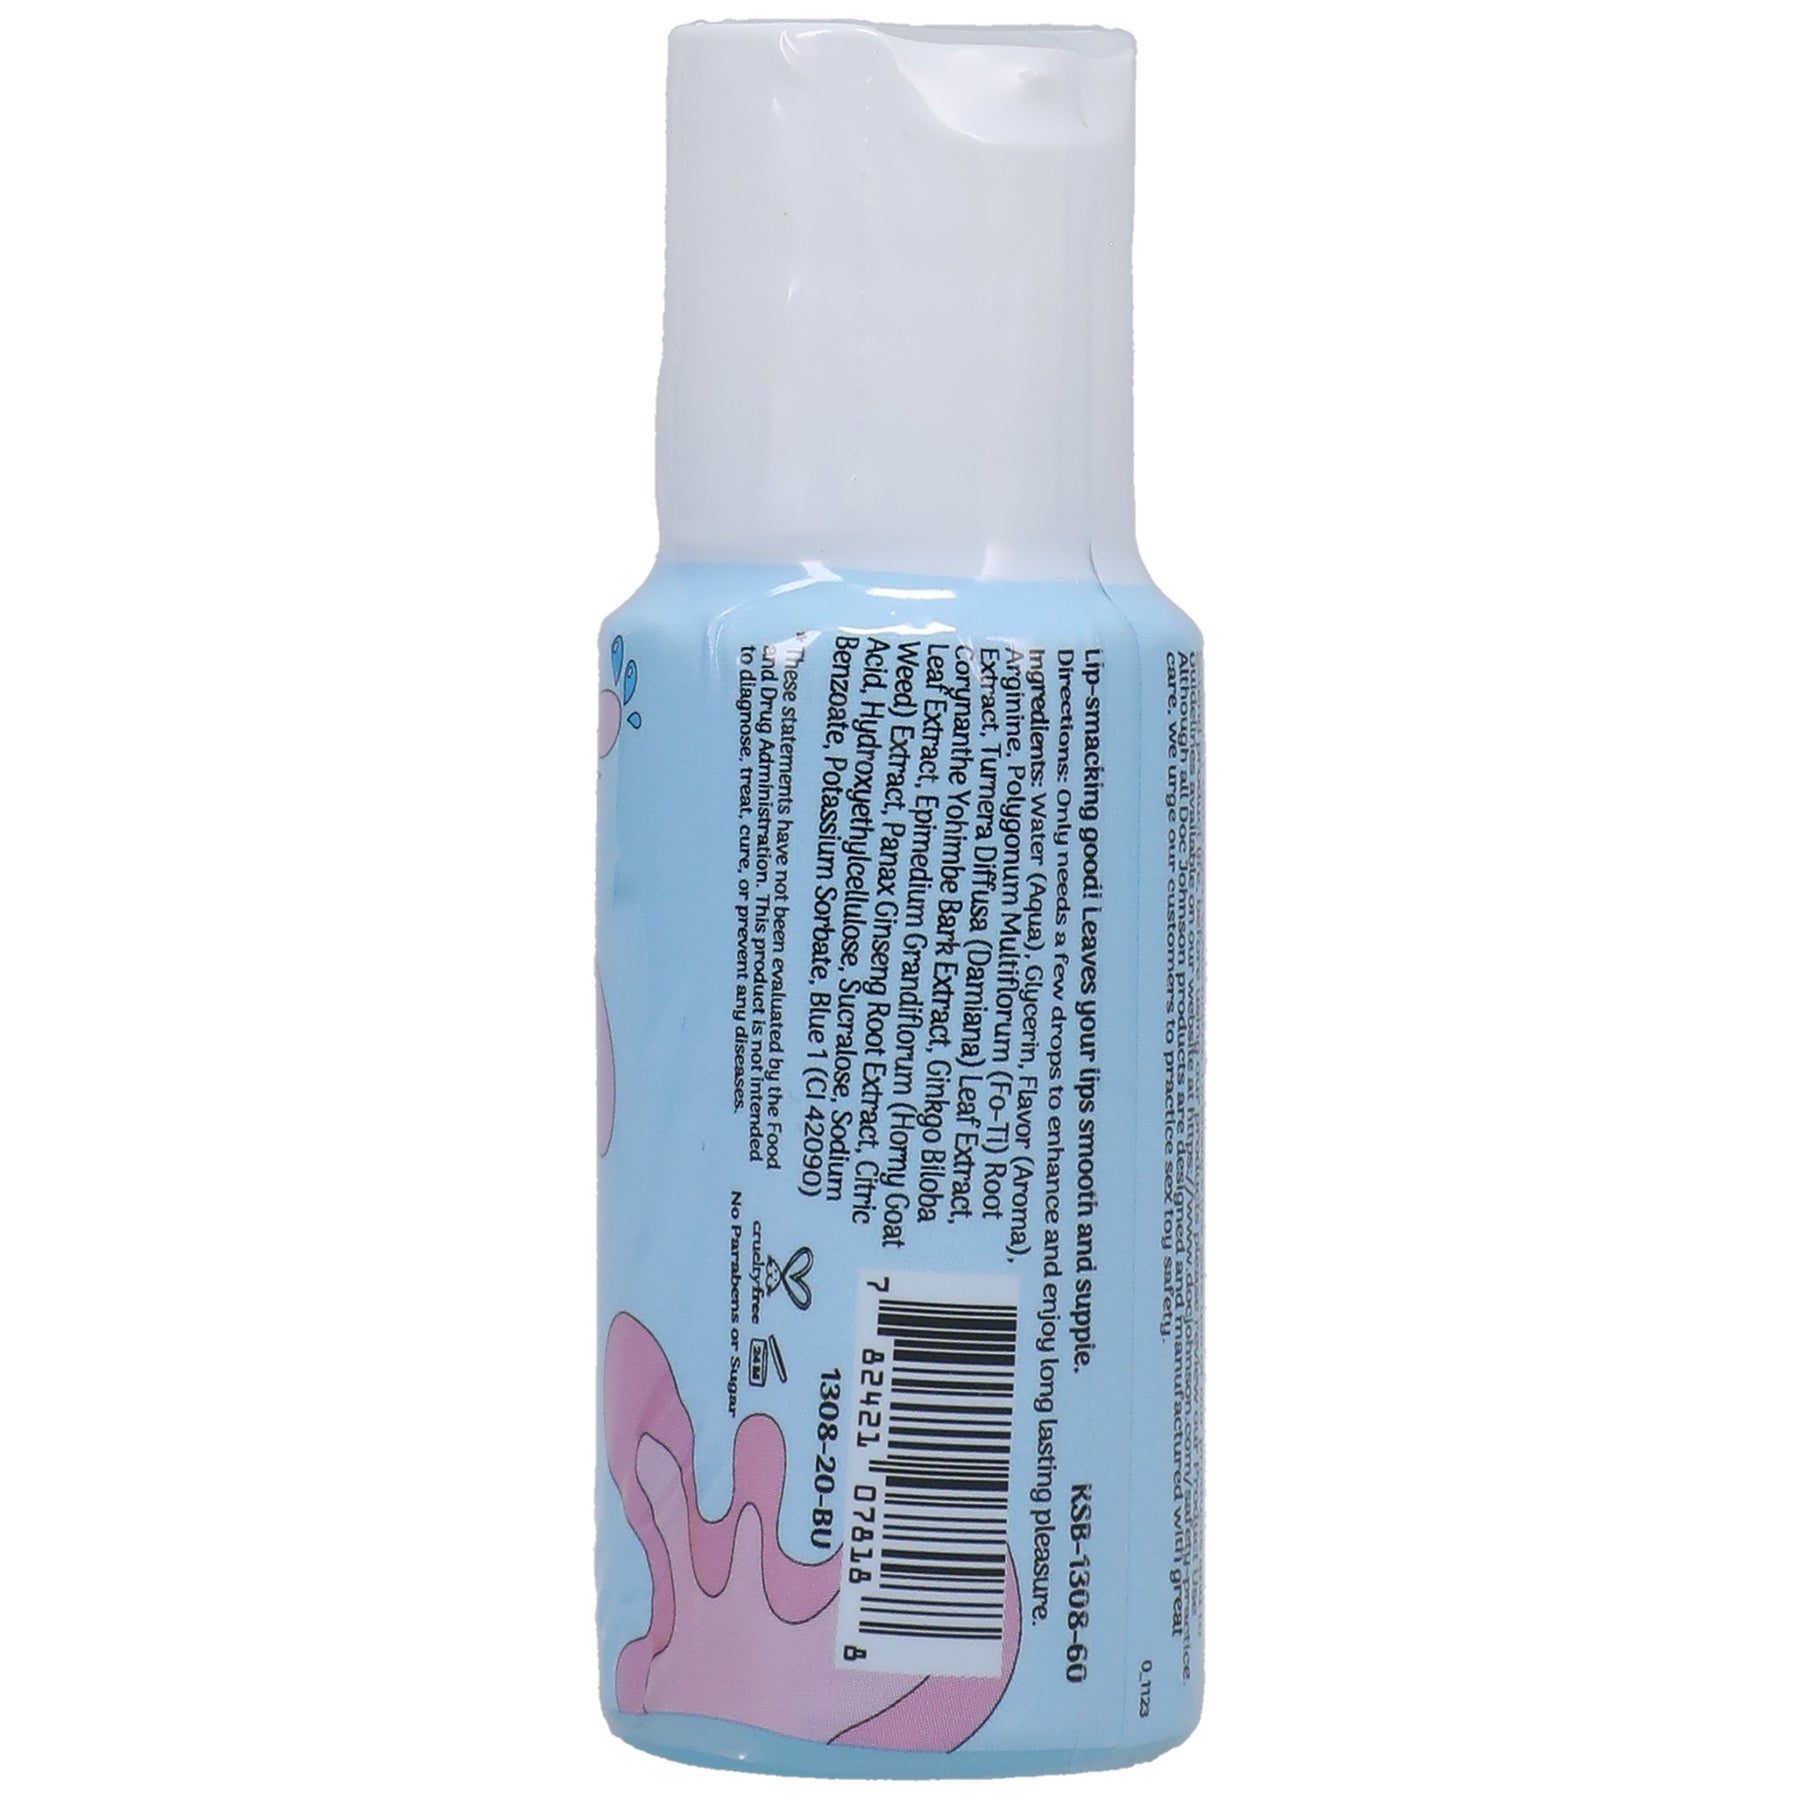 Spanish Fly - Sex Drops - Cotton Candy - 1 Oz-1